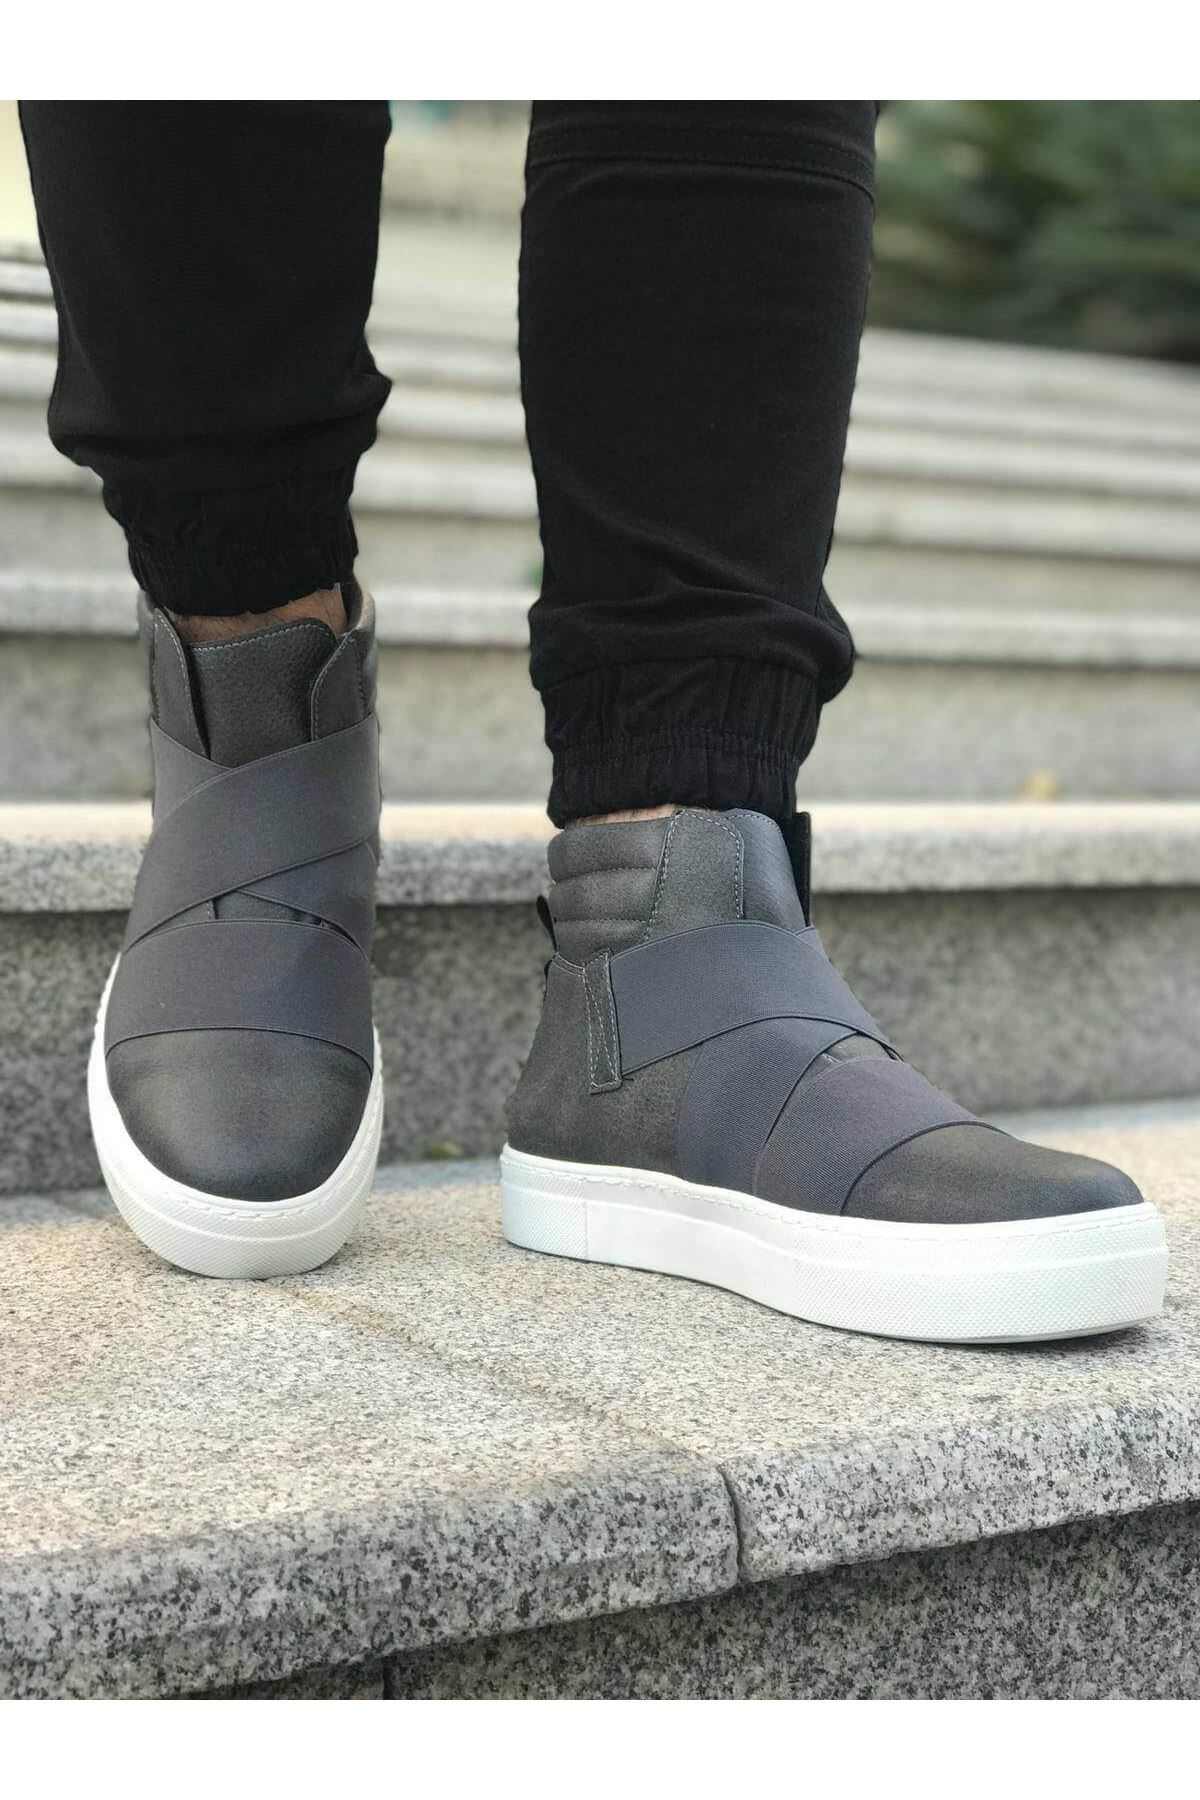 Chekich Men's Boots Navy Blue Faux Leather Elastic Band Closure Spring & Autumn Seasons High Quality Sneakers 2021 Fashion Wedding Male Solid Basic Comfortable Flexible Odorless Ankle Sewing Base Office Nature CH023 V4